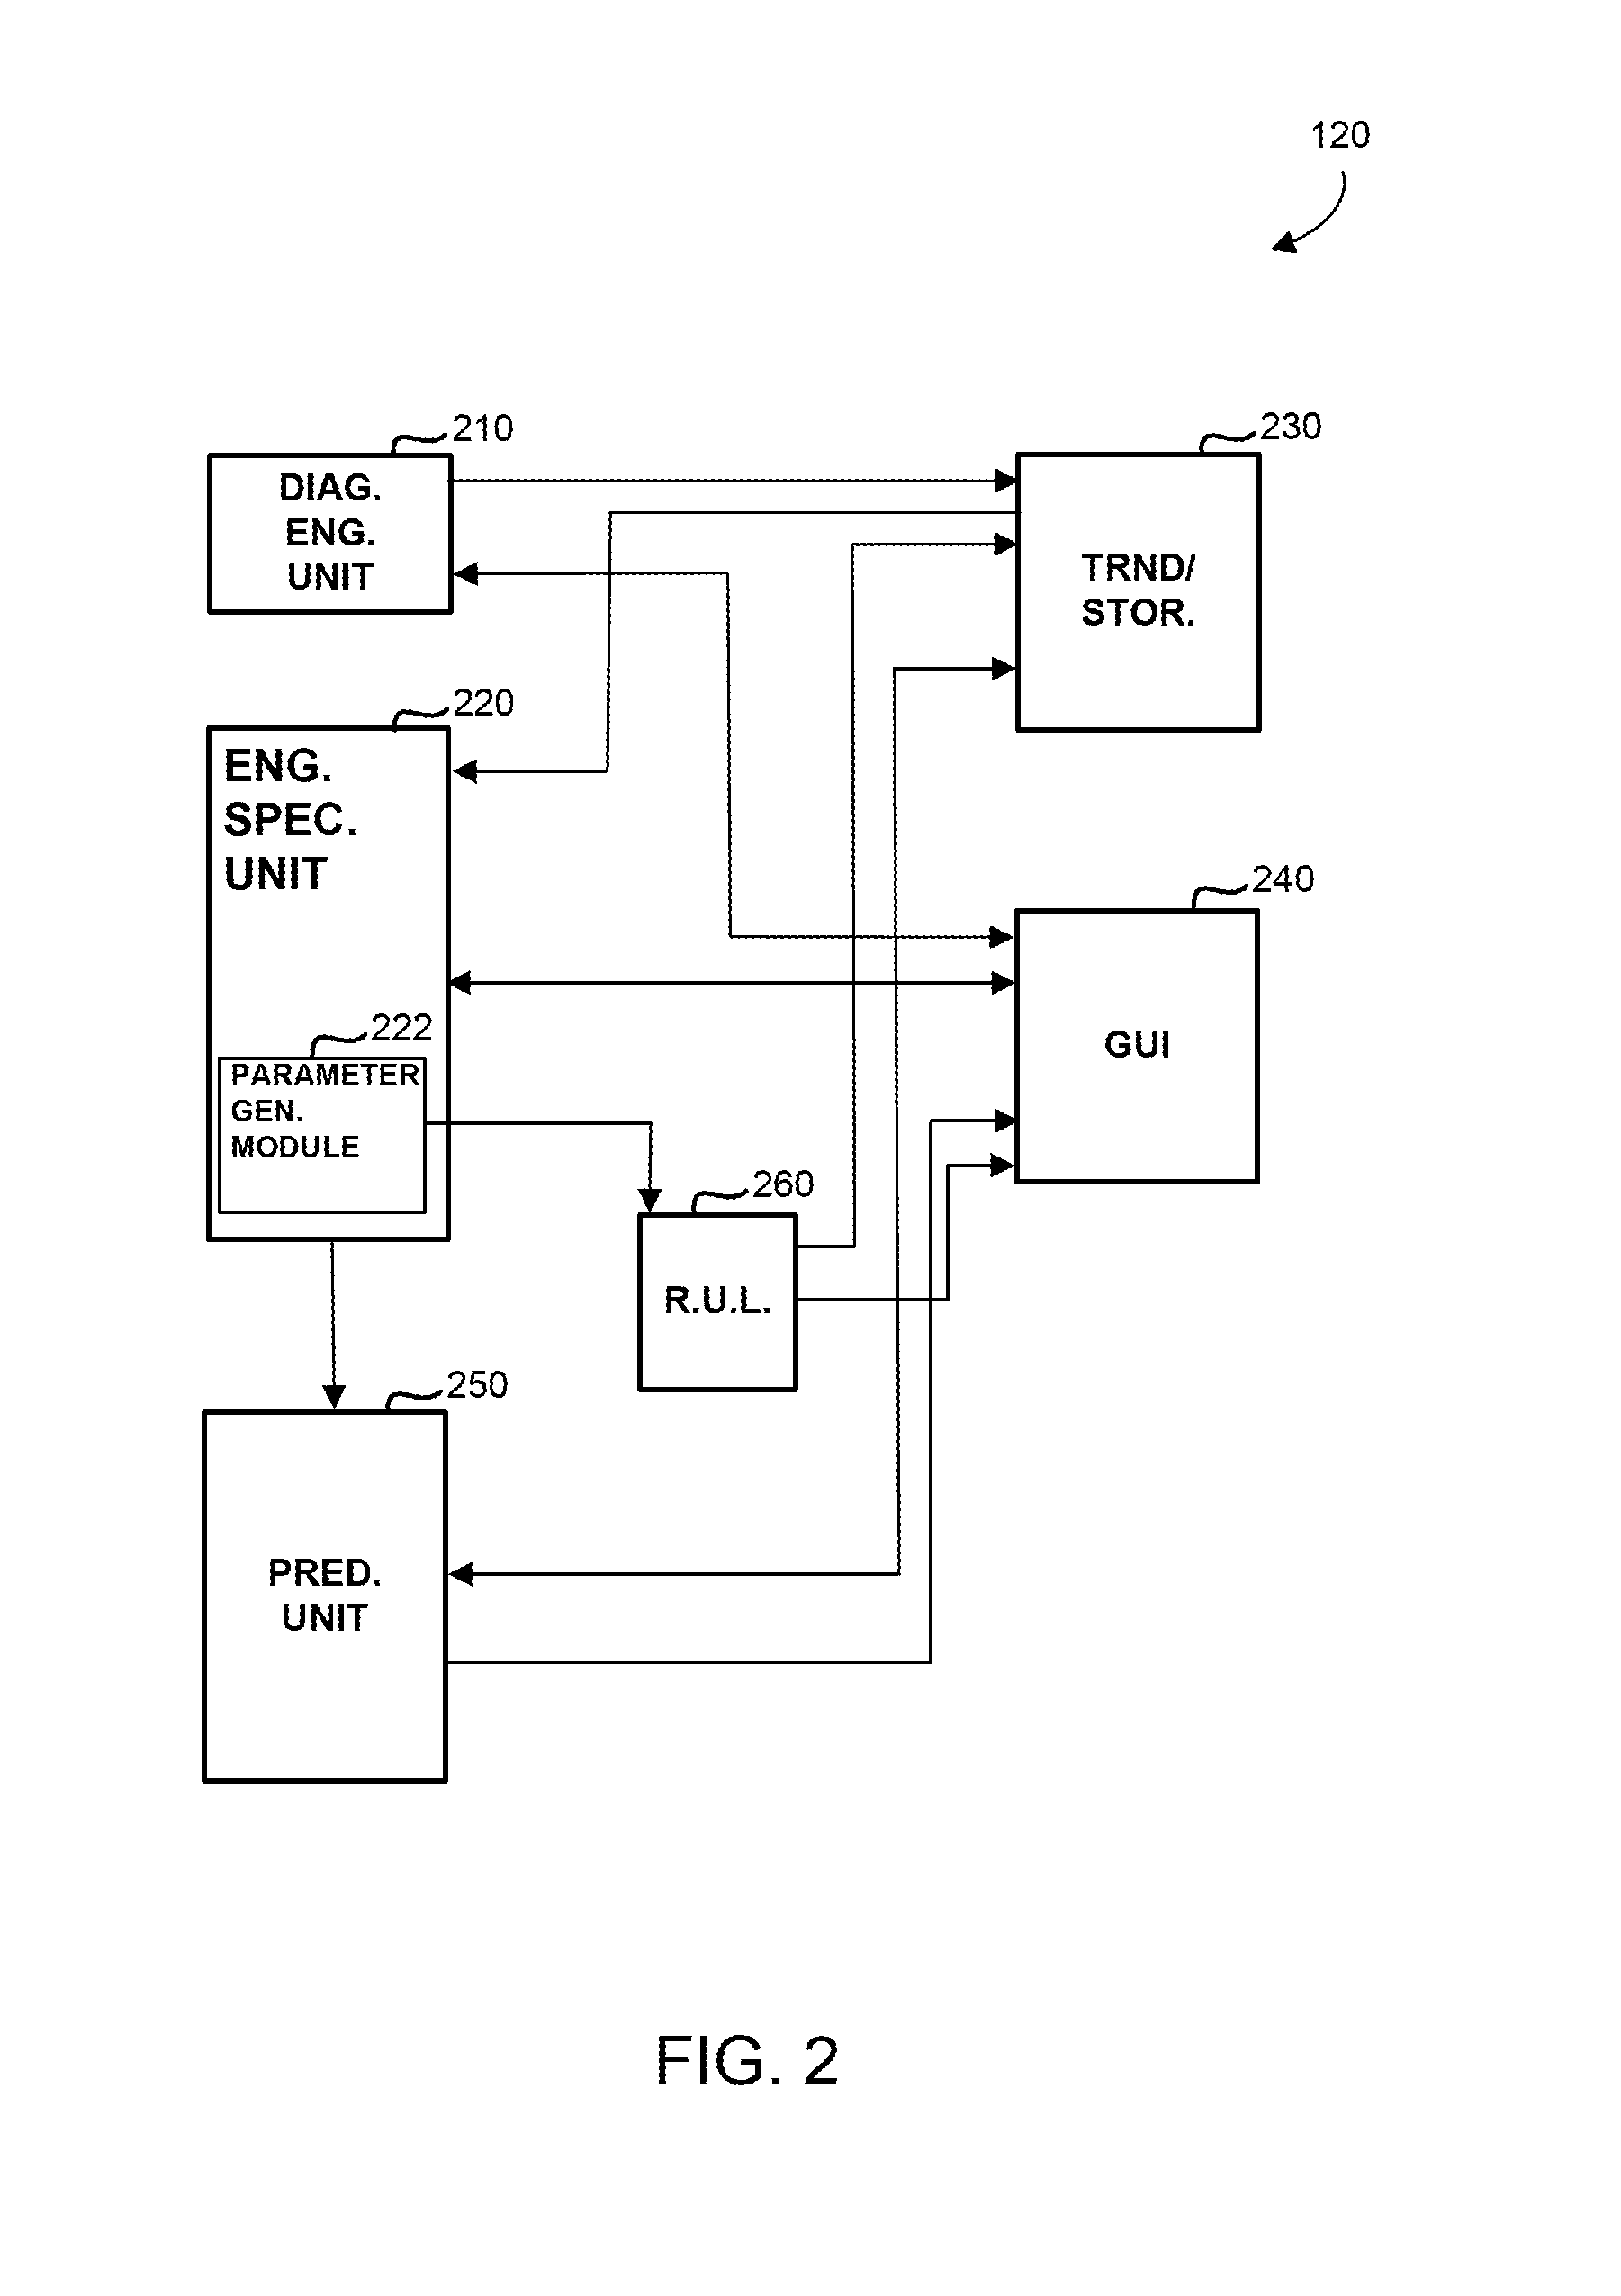 Operations support systems and methods for calculating and evaluating turbine temperatures and health